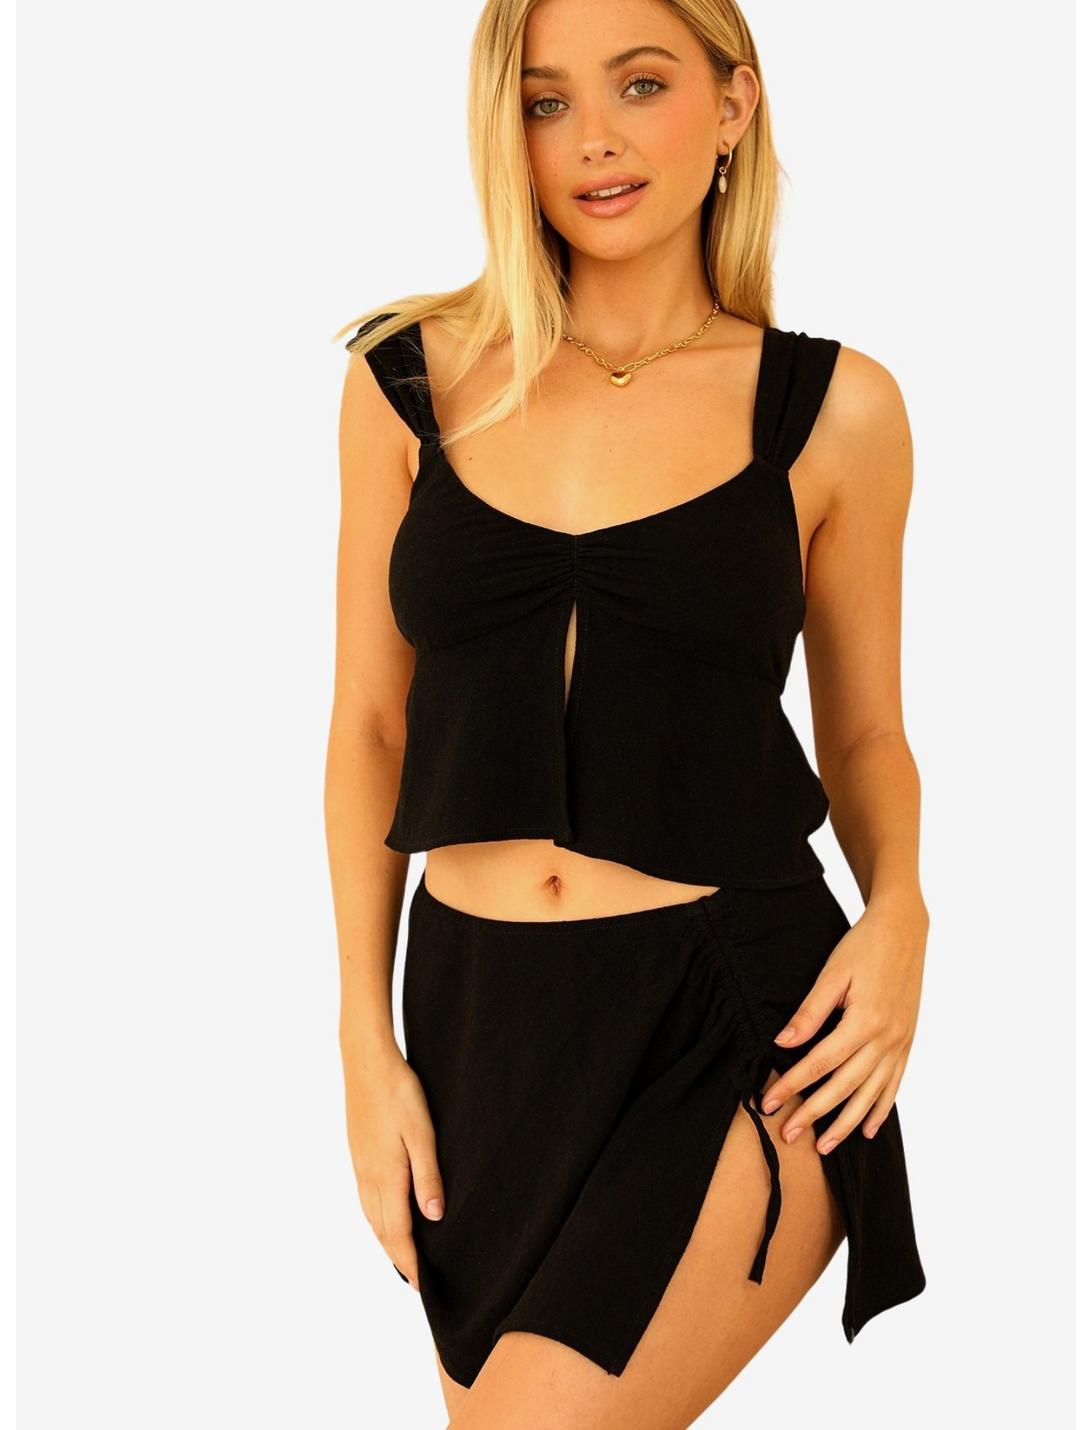 Dippin' Daisy's Paola Swim Cover-Up Top Black, BLACK, hi-res